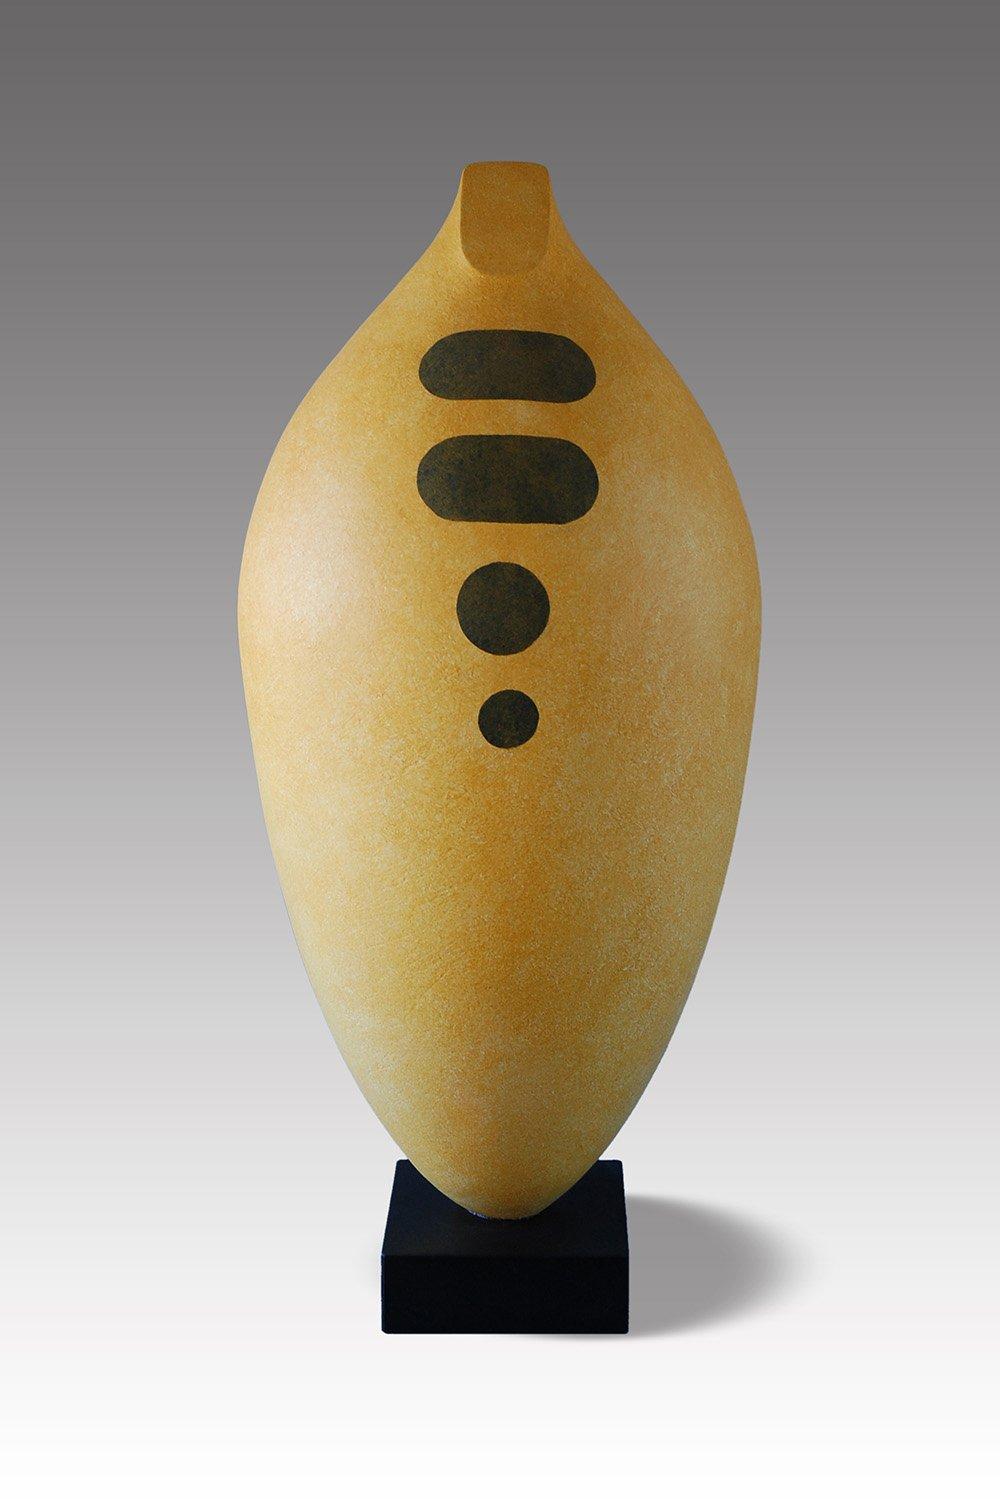 Eternal is a unique painted fired clay mounted on granite sculpture by contemporary artist Patricia Volk, dimensions are 69 × 30 × 30 cm
(27.2 × 11.8 × 11.8 in). 
The sculpture is signed and comes with a certificate of authenticity. 

Abstract